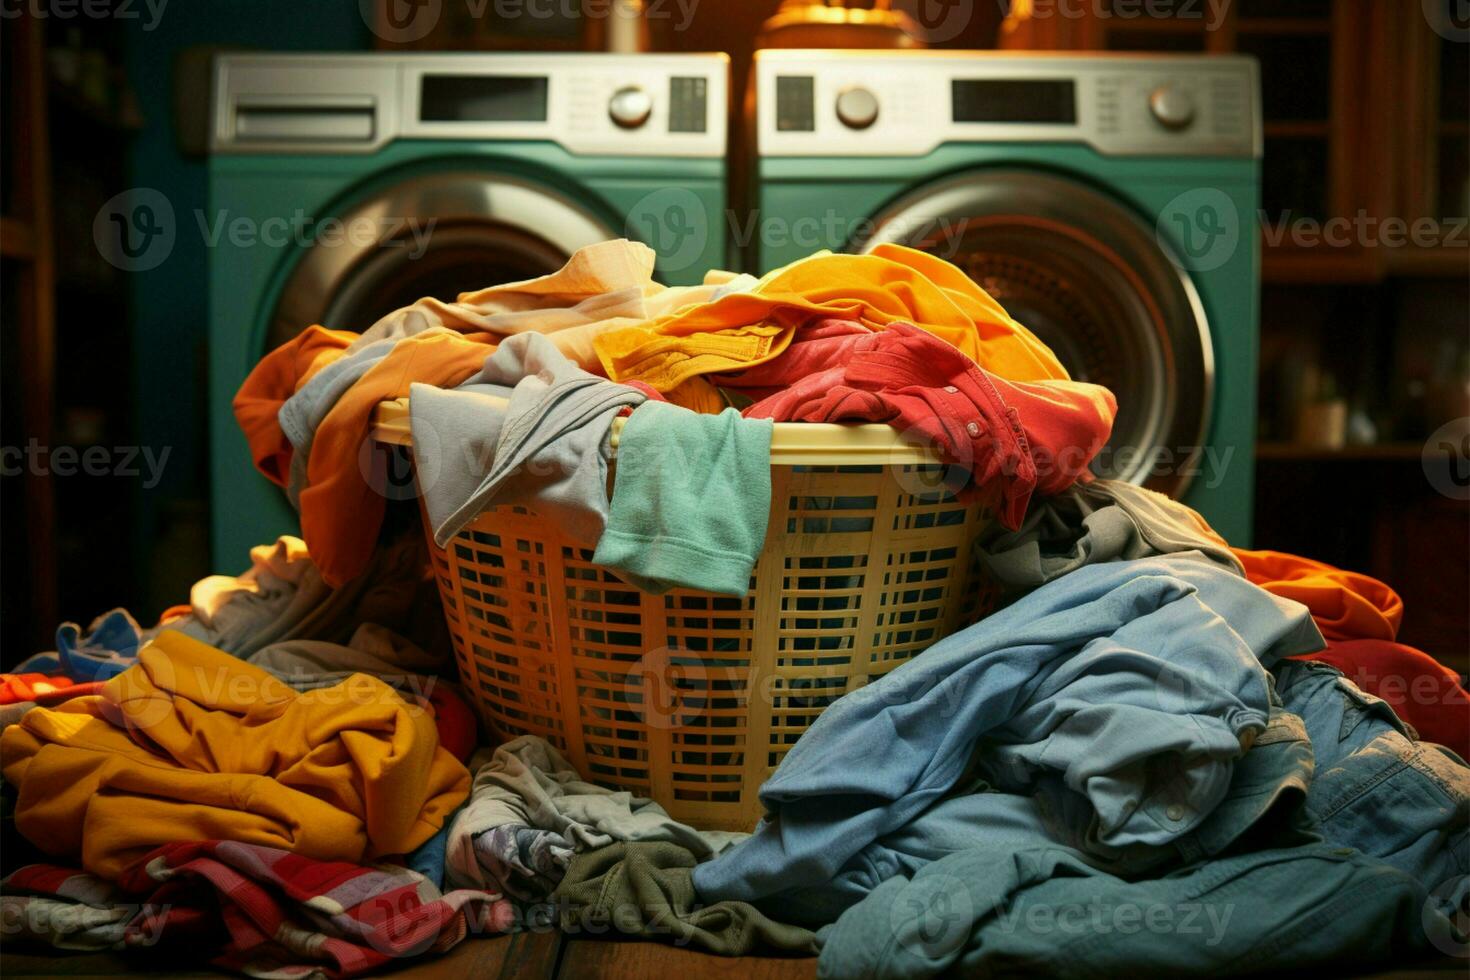 AI generated Clothes accumulate, creating a messy scene within the confines of the laundry basket photo